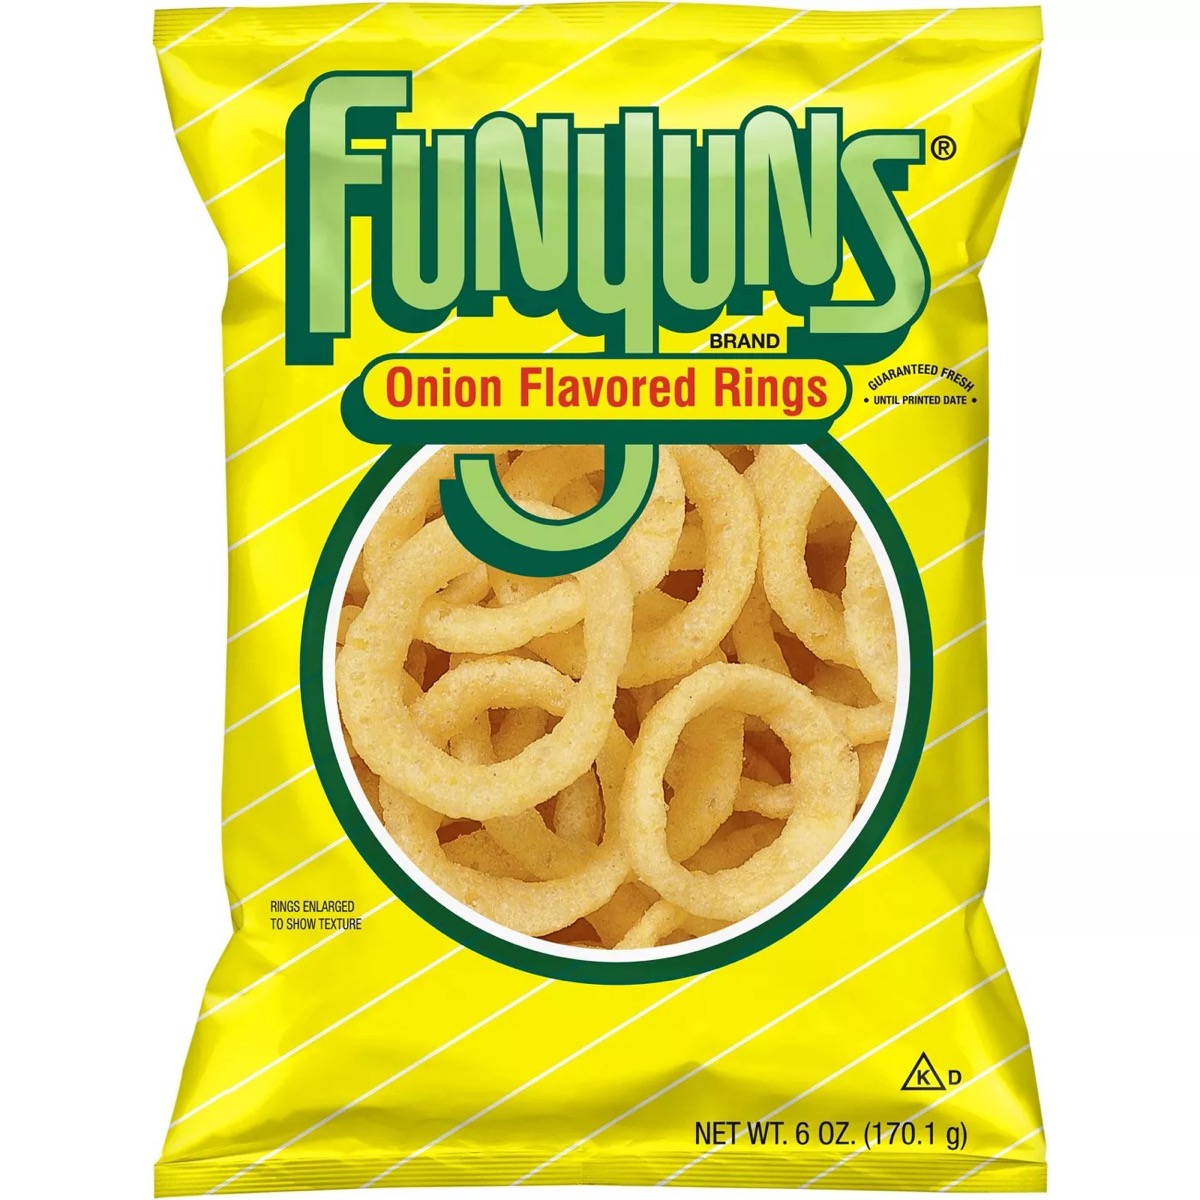 yellow bag of funyuns onion flavored rings on white background